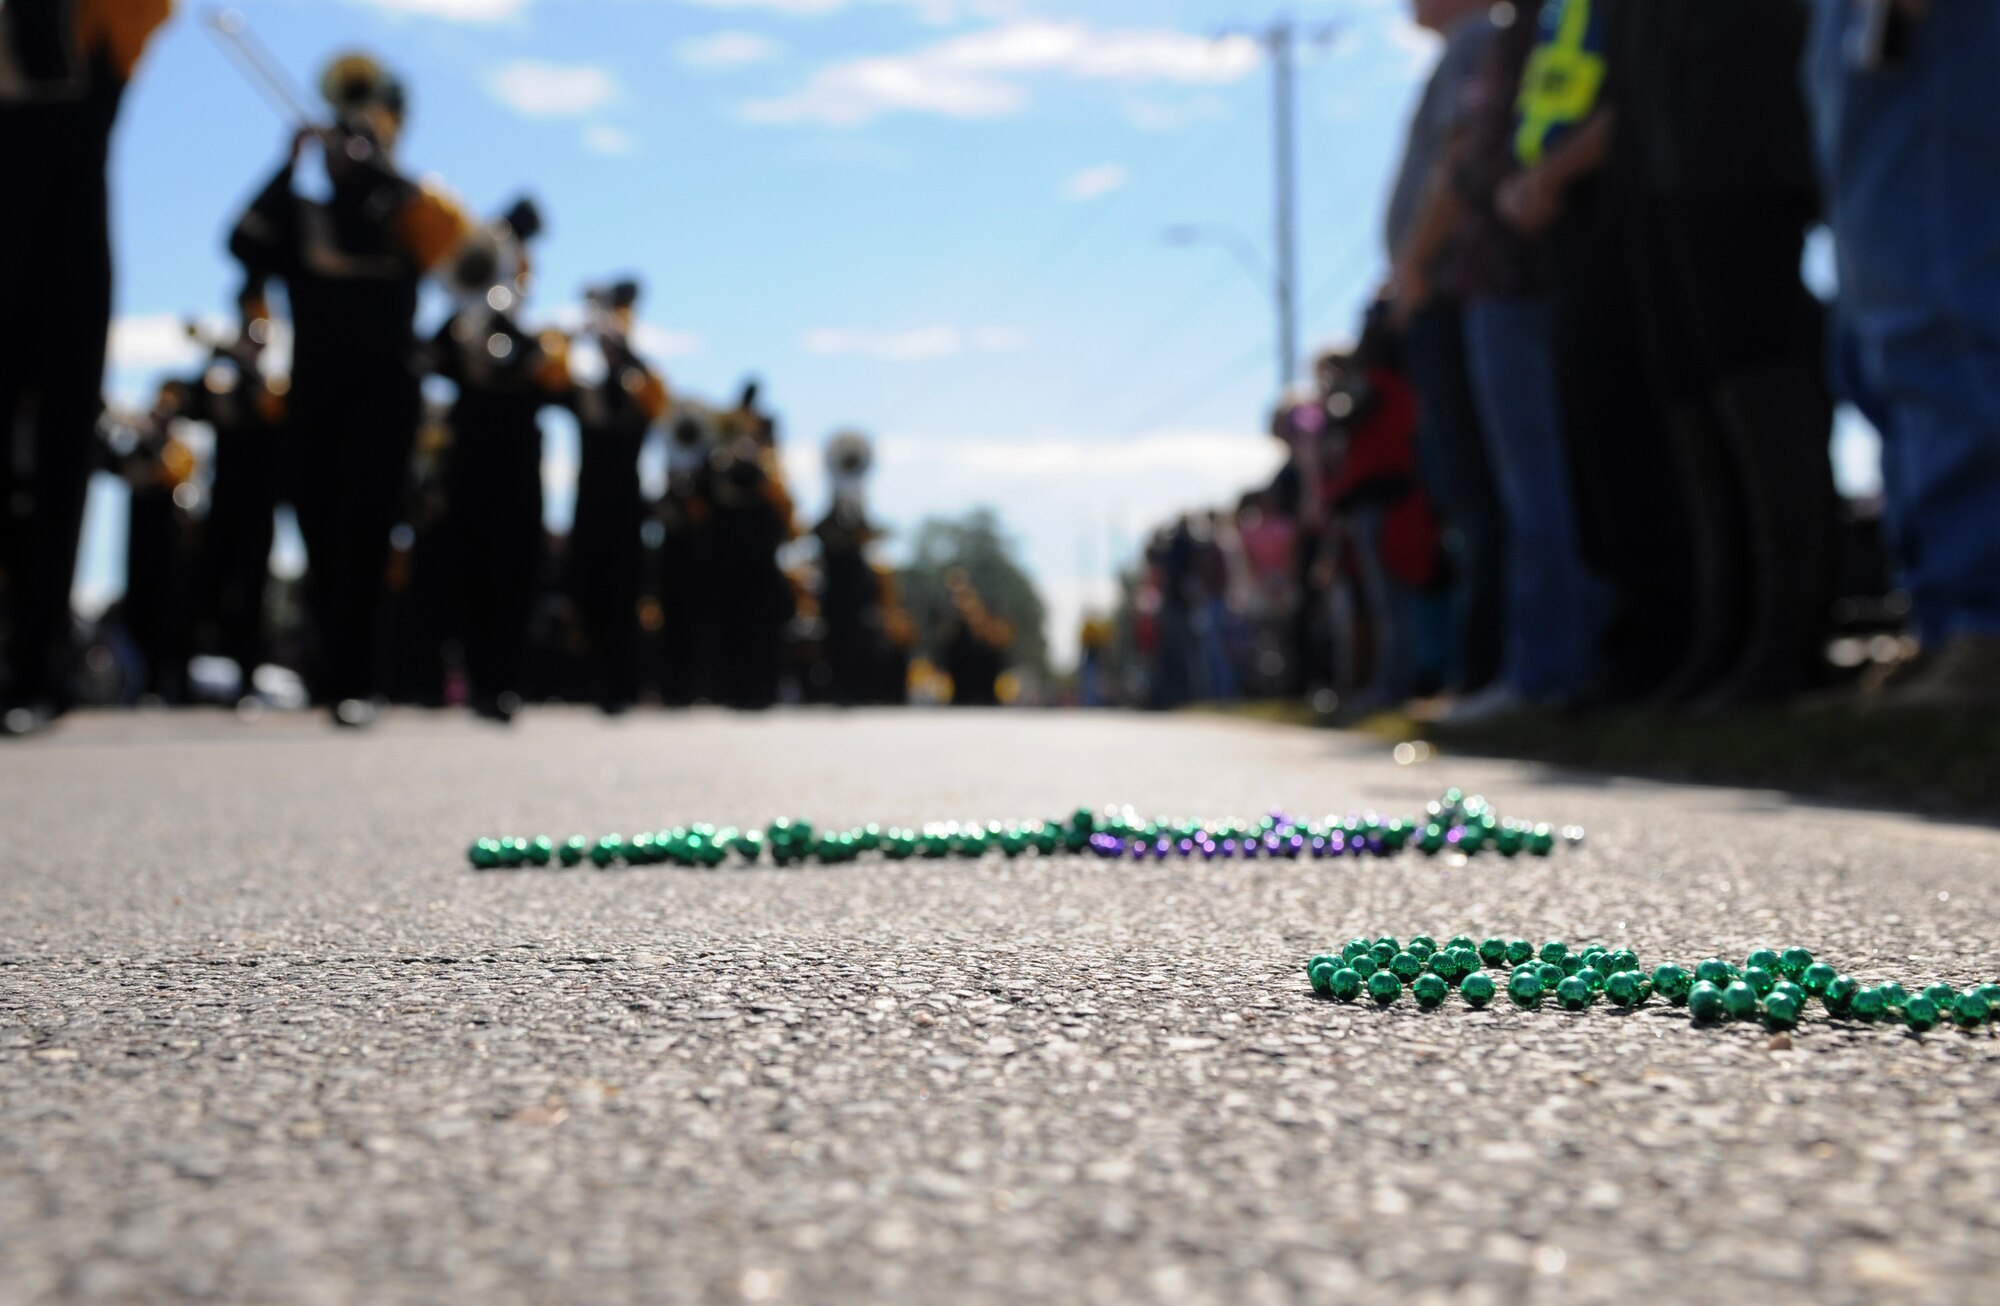 Necklaces lay on the ground at the 16th Annual Gulf Coast Veterans Day Parade Nov. 12, 2016, in D’Iberville. Miss. More than 5,000 Mississippi and Louisiana citizens showed up to participate in the parade to honor Gulf Coast veterans. Keesler Honor Guard members, base leadership and more than 215 81st Training Group Airmen with the 50 State Flag Team and Drum and Bugle Corps also came out to celebrate the holiday. (U.S. Air Force photo by Senior Airman Holly Mansfield)